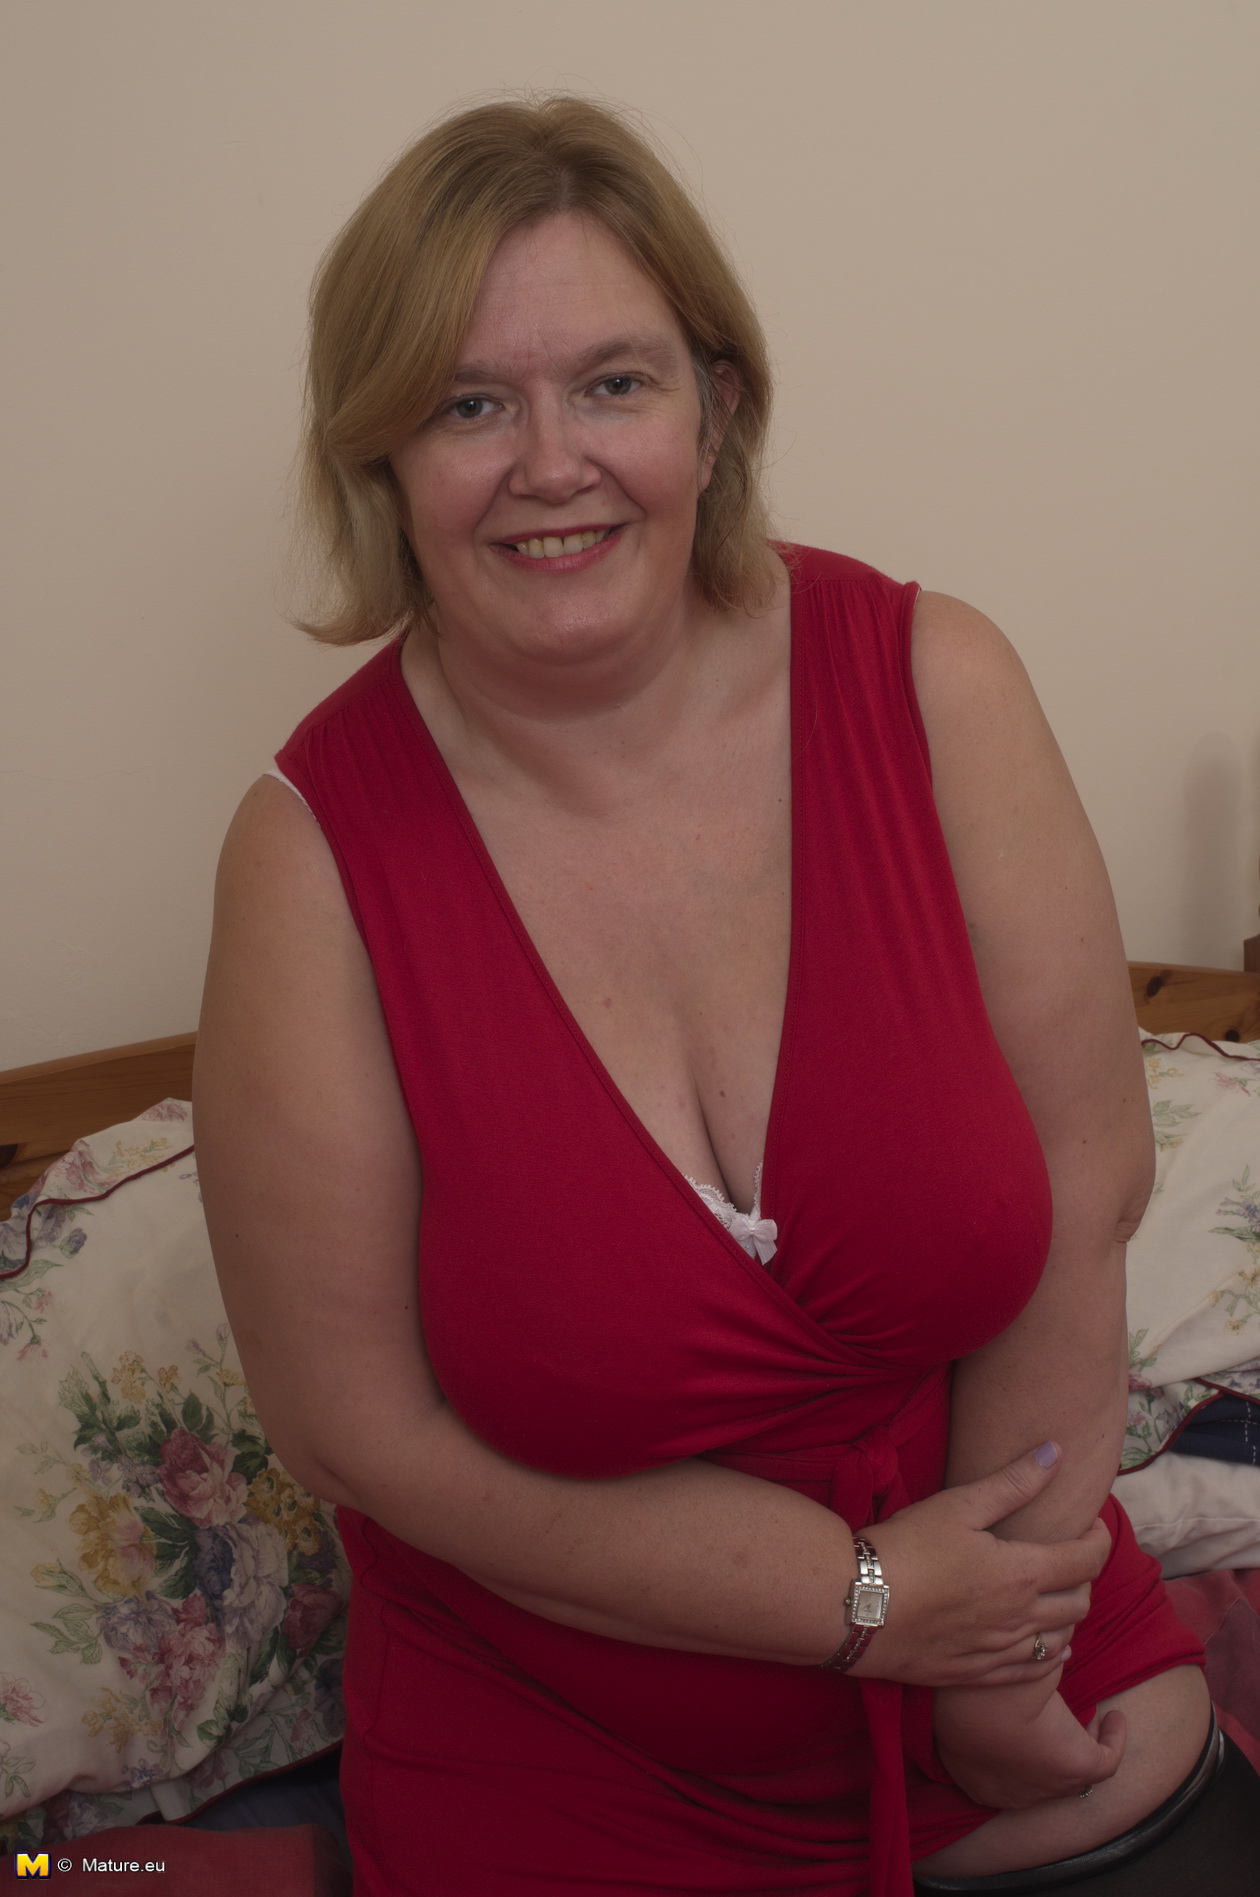 Large British mature lady with big natural tits getting dirty image picture